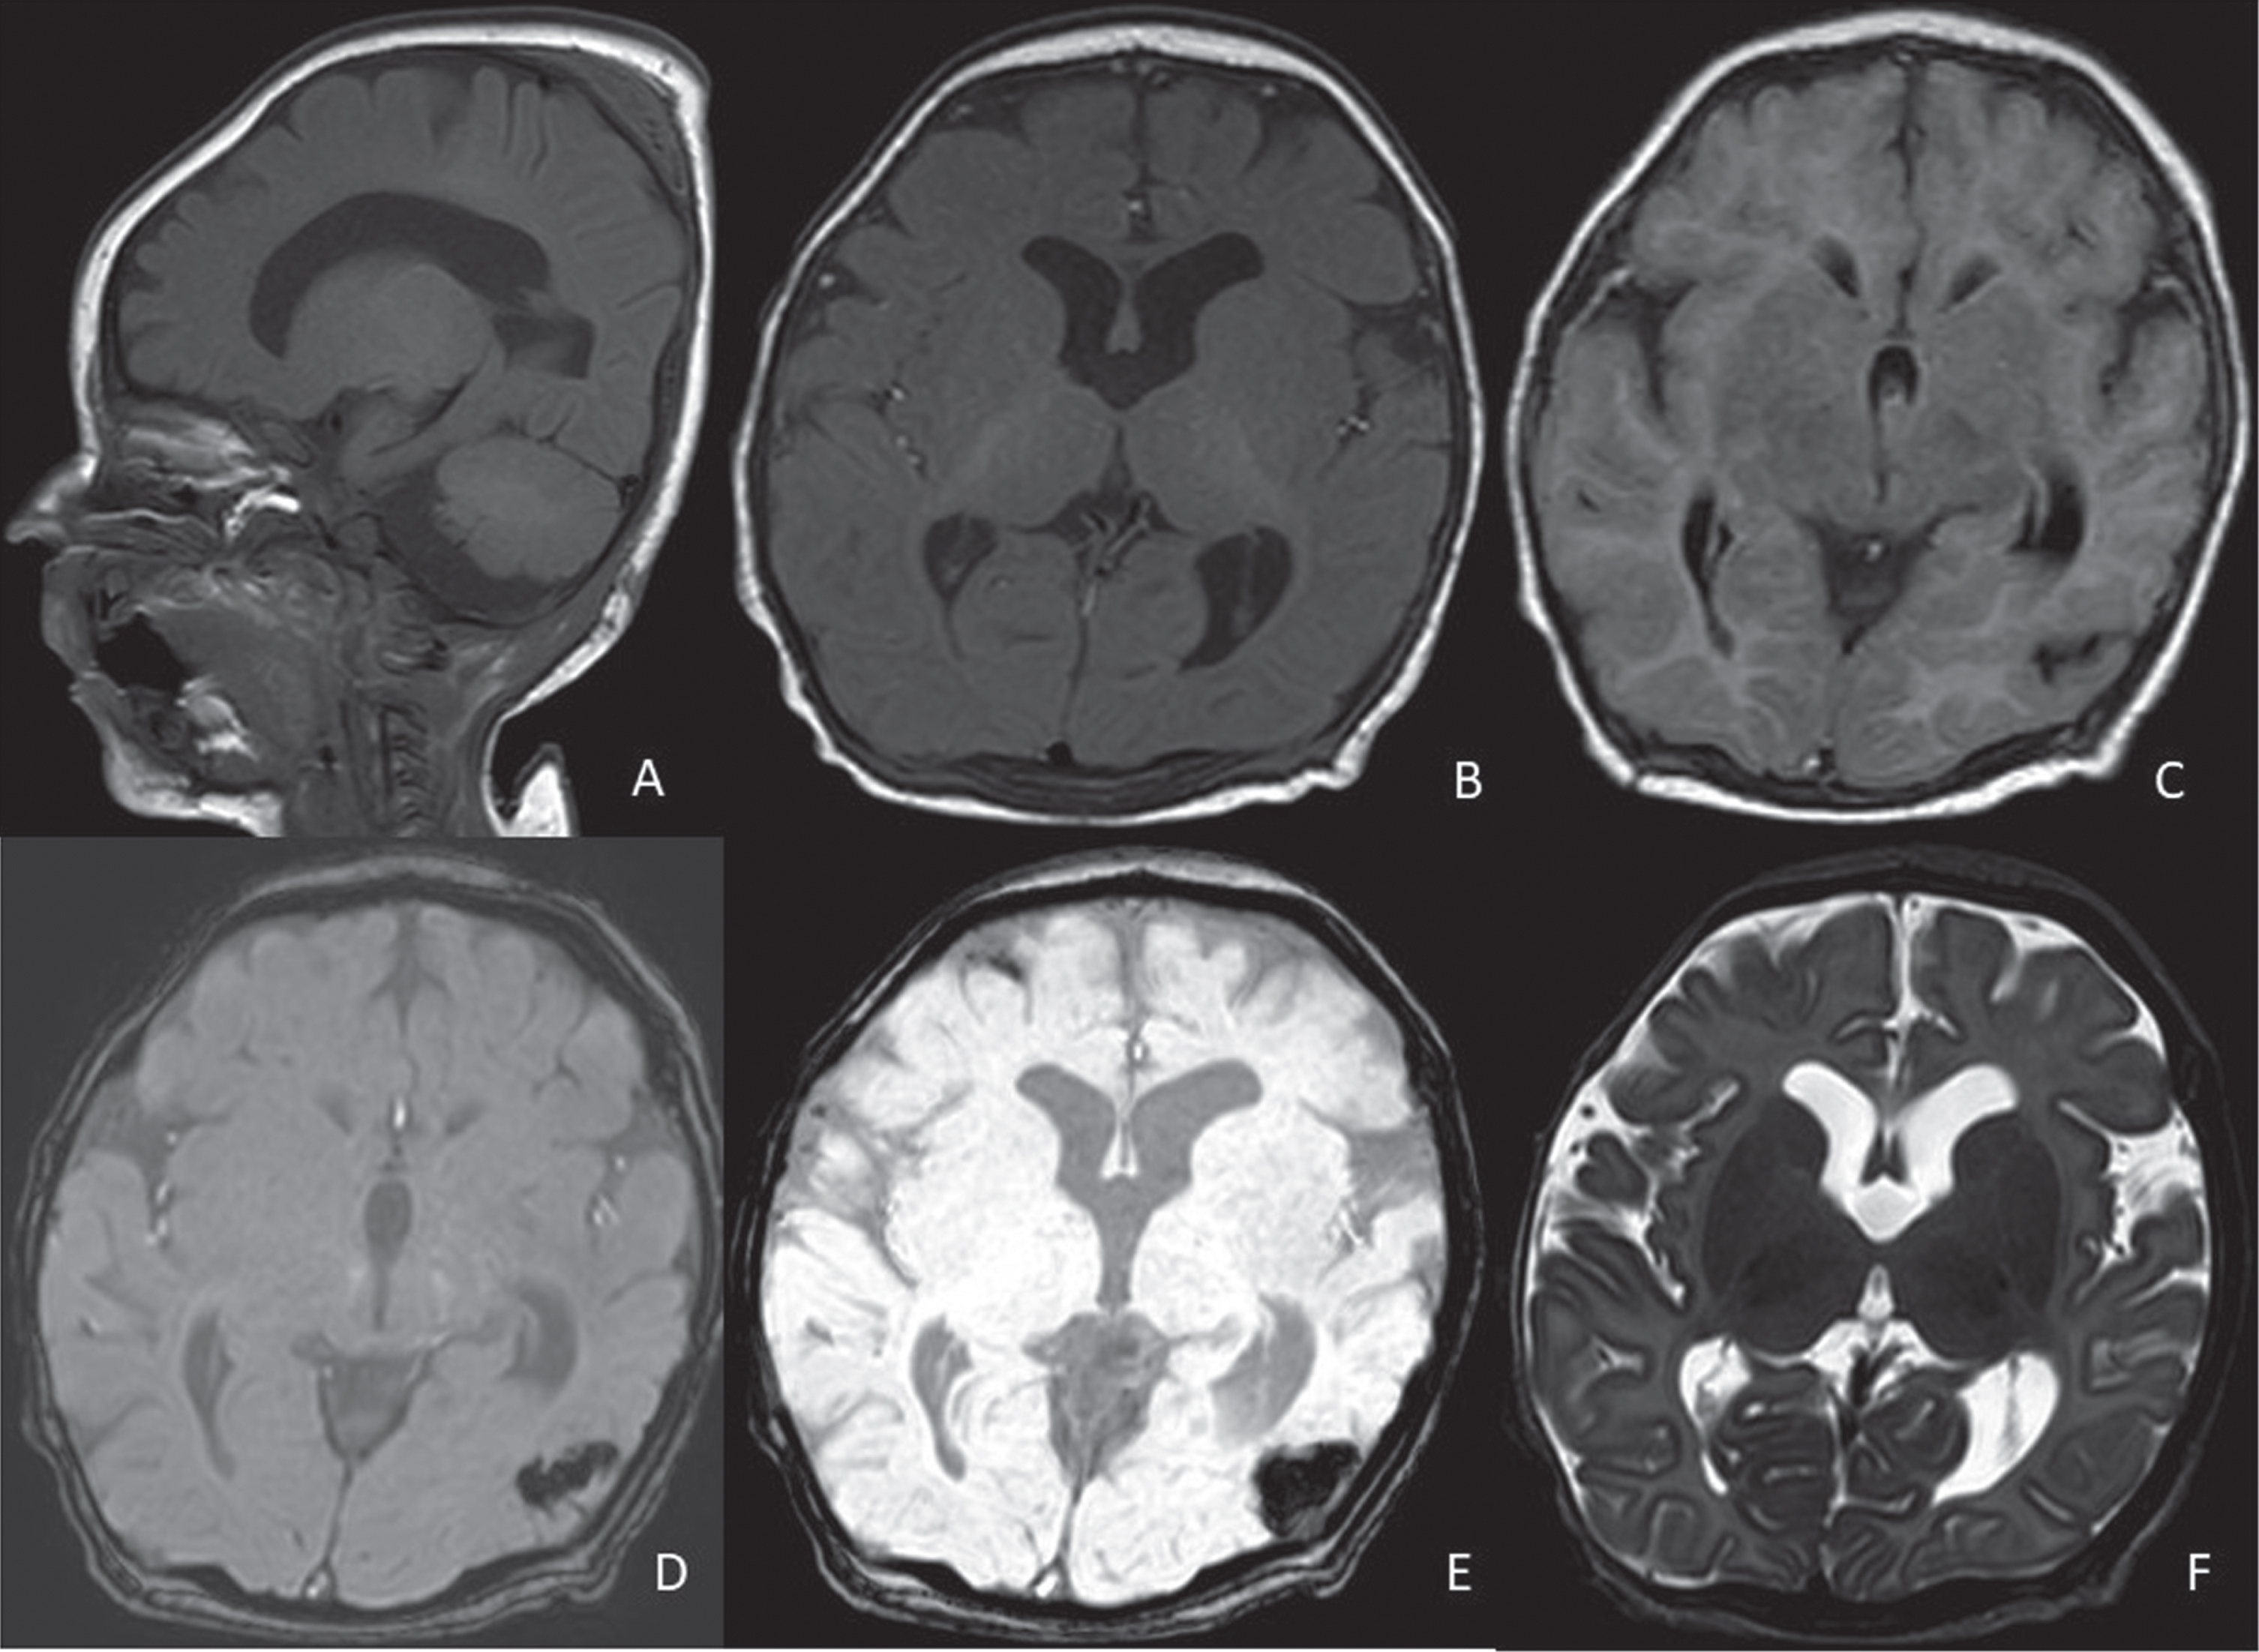 Control brain MRI of patient #1 at 3 months of age. Dilated ventricualr system (especially at the lateral ventricles level, A-F), increased CSF spaces in the rolandic areas bilaterally, chronic evolution of a focal haemorrhage at the left temporo-occipital carrefour. A: sagittal T1, B: axial T1, C: axial FLAIR, D: axial susceptibility-weighted phase (SWIp) fast, E: axial minimum intensity projection (miniP), F: axial T2-weighted sequence.